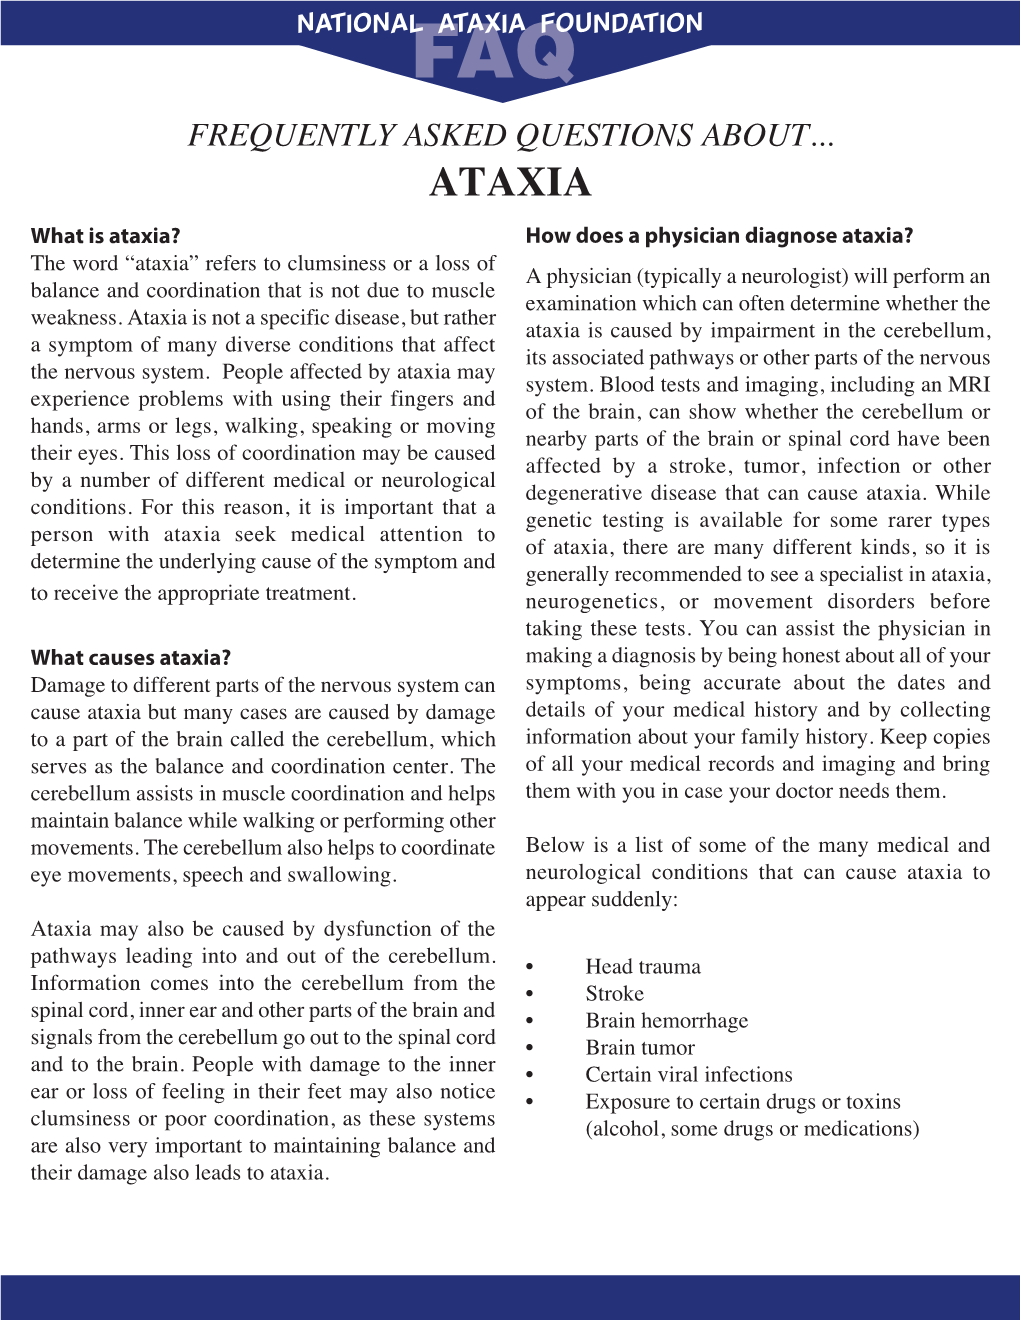 Frequently Asked Questions About...Ataxia